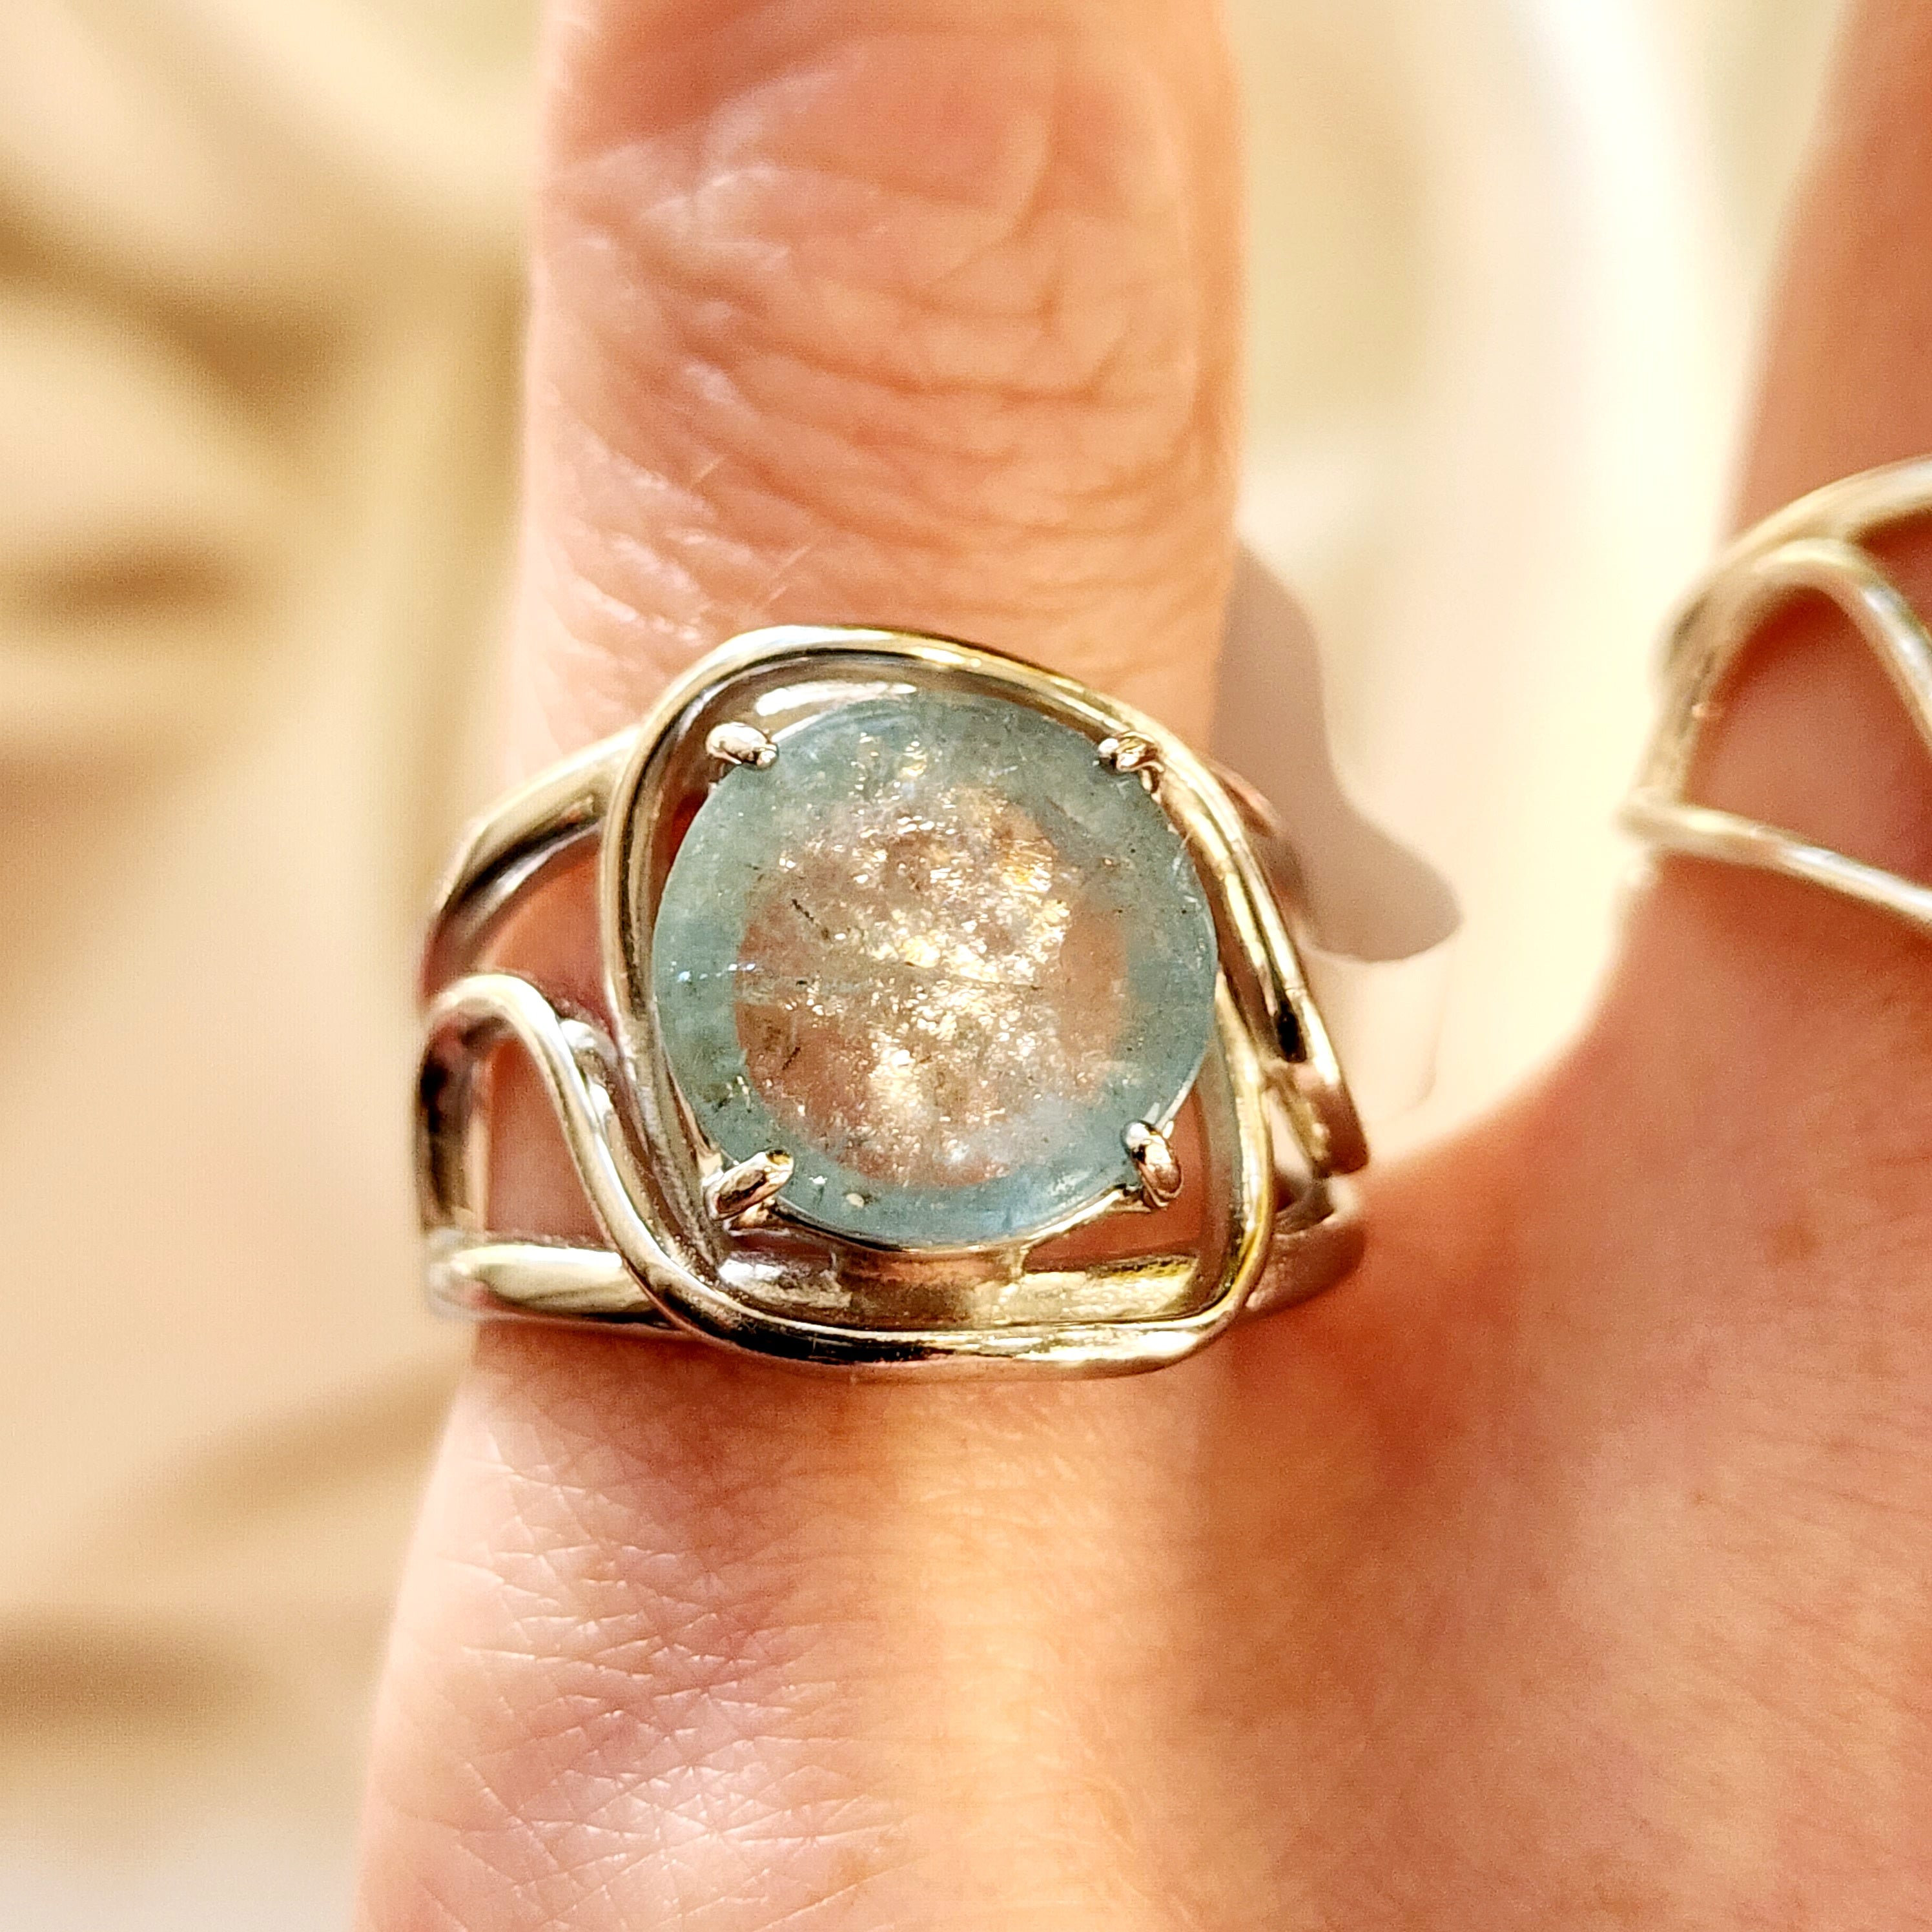 Flashy Aquamarine Finger Cuff Adjustable Ring .925 Sterling Silver for Improving Communication and Healing